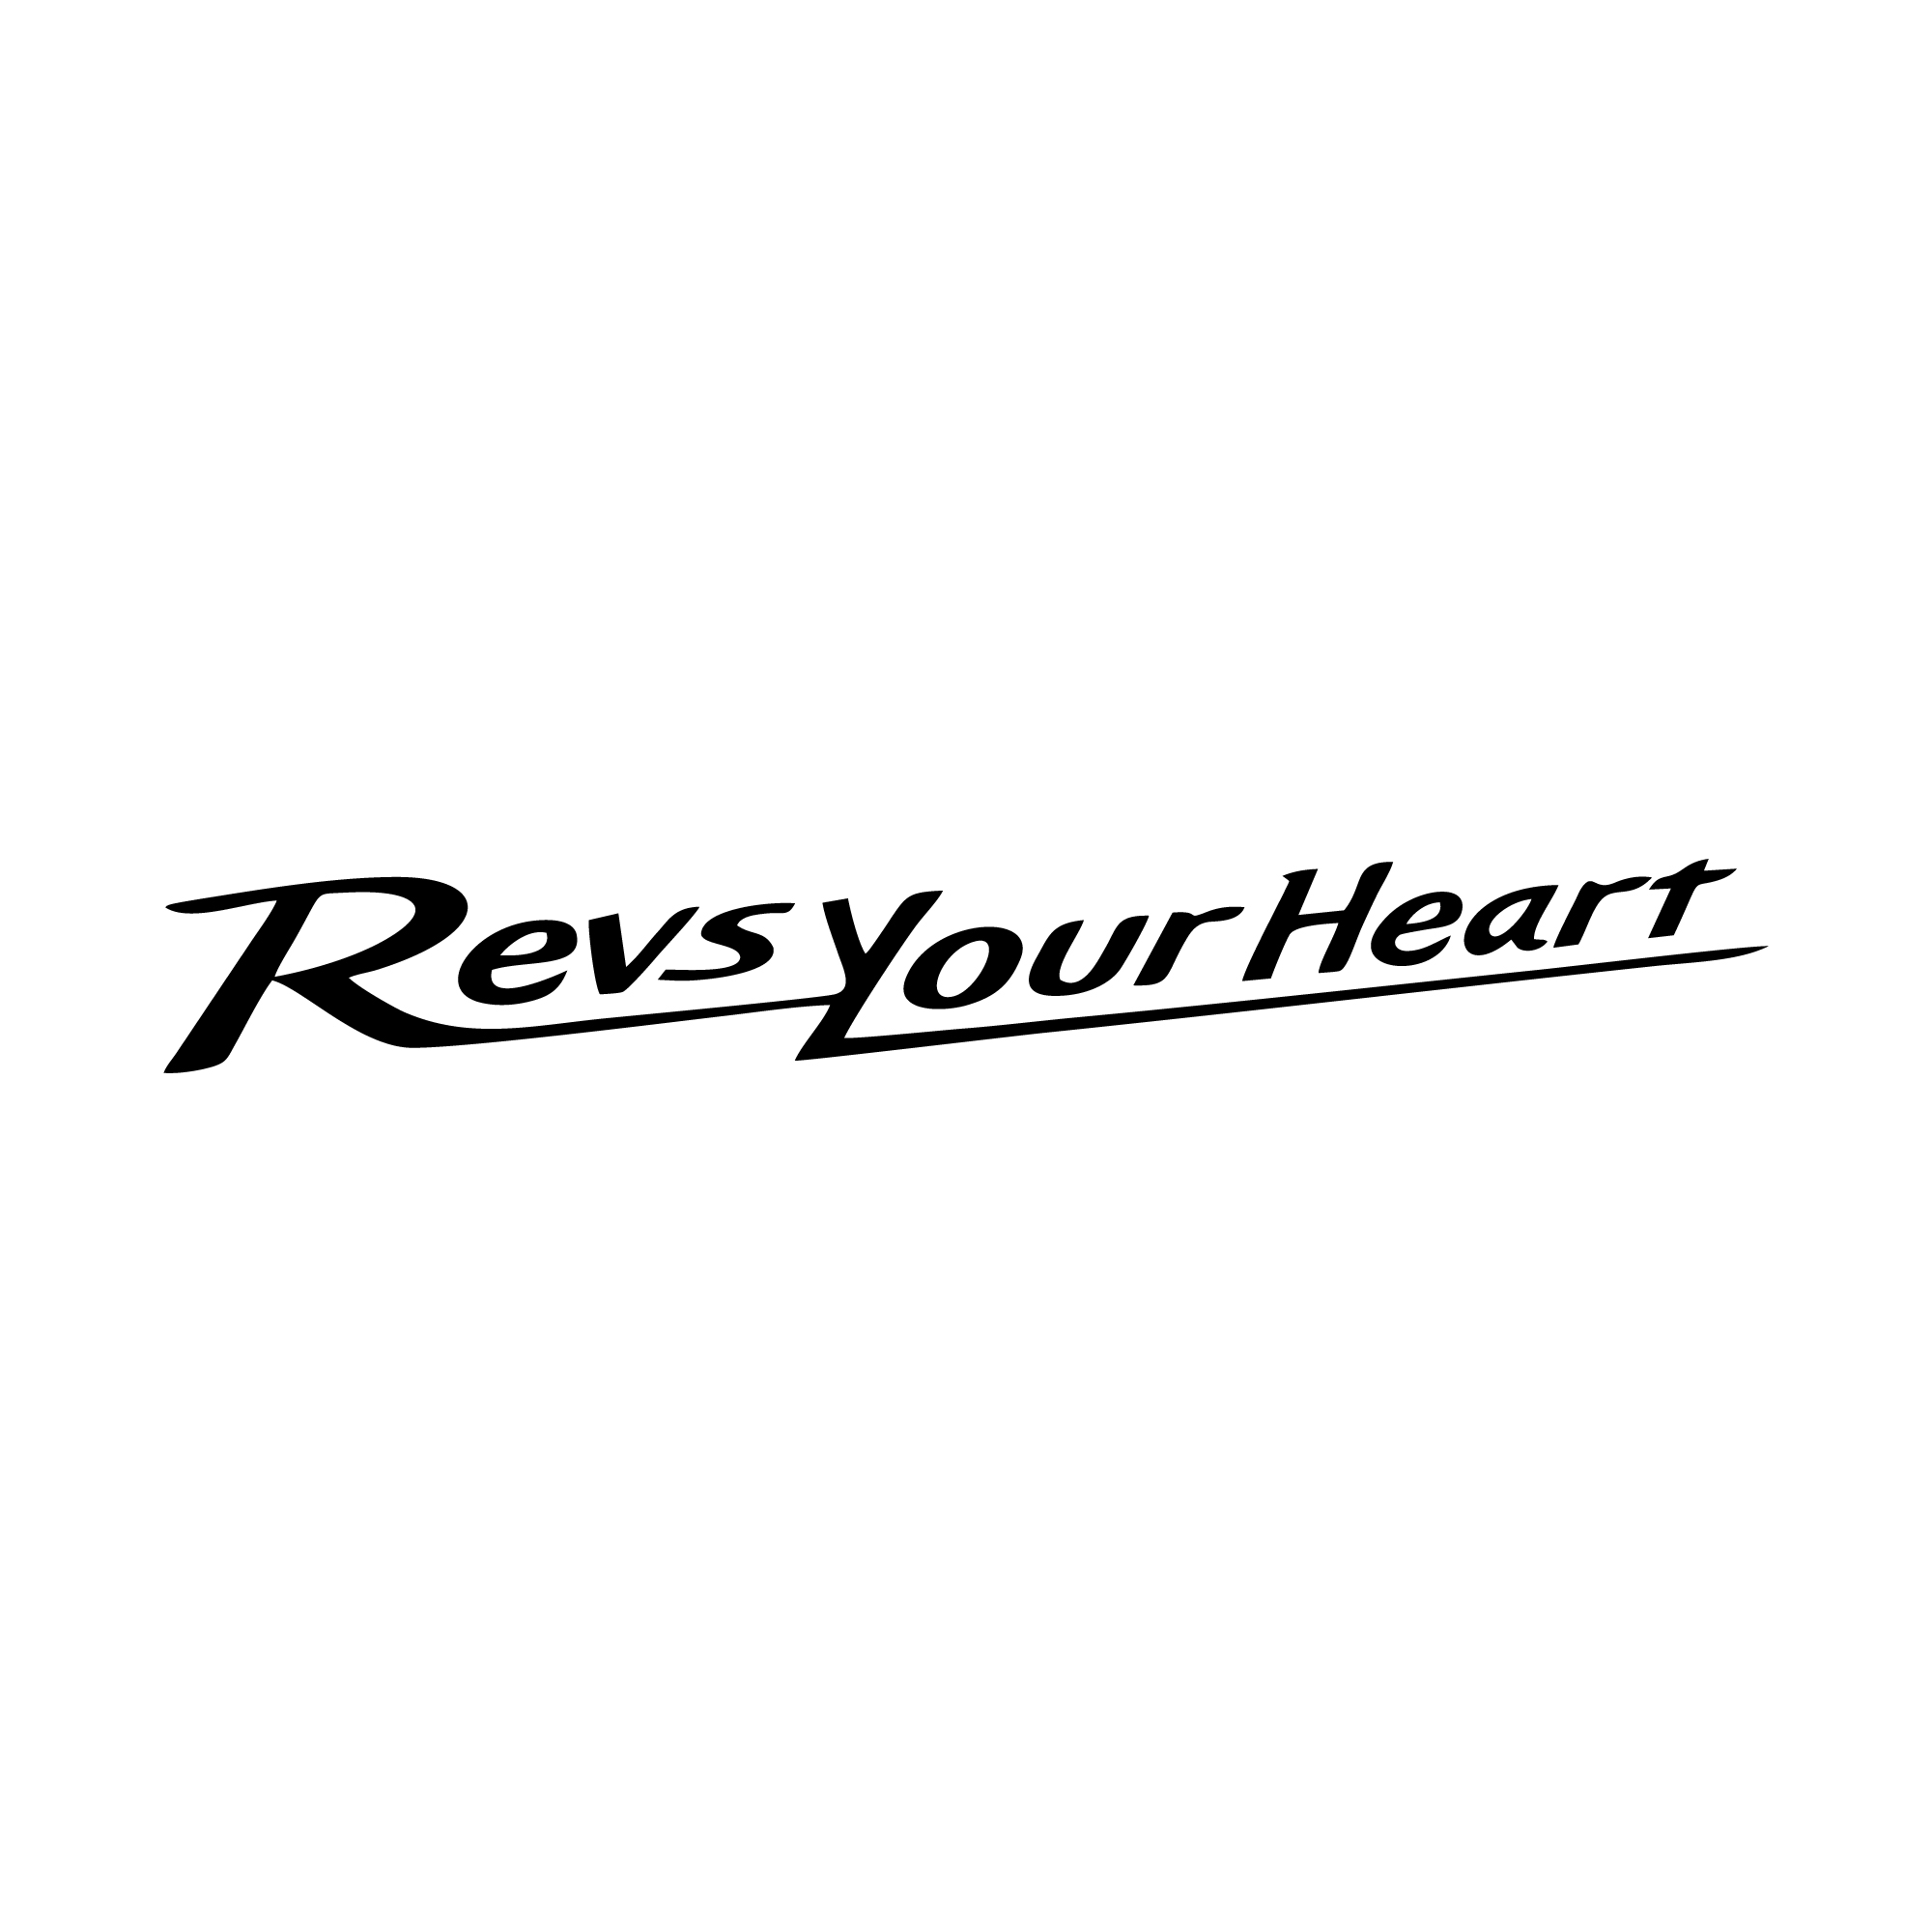 Free Download Revs Your Heart Yamaha Full Vectors Shared by Pixahunt 